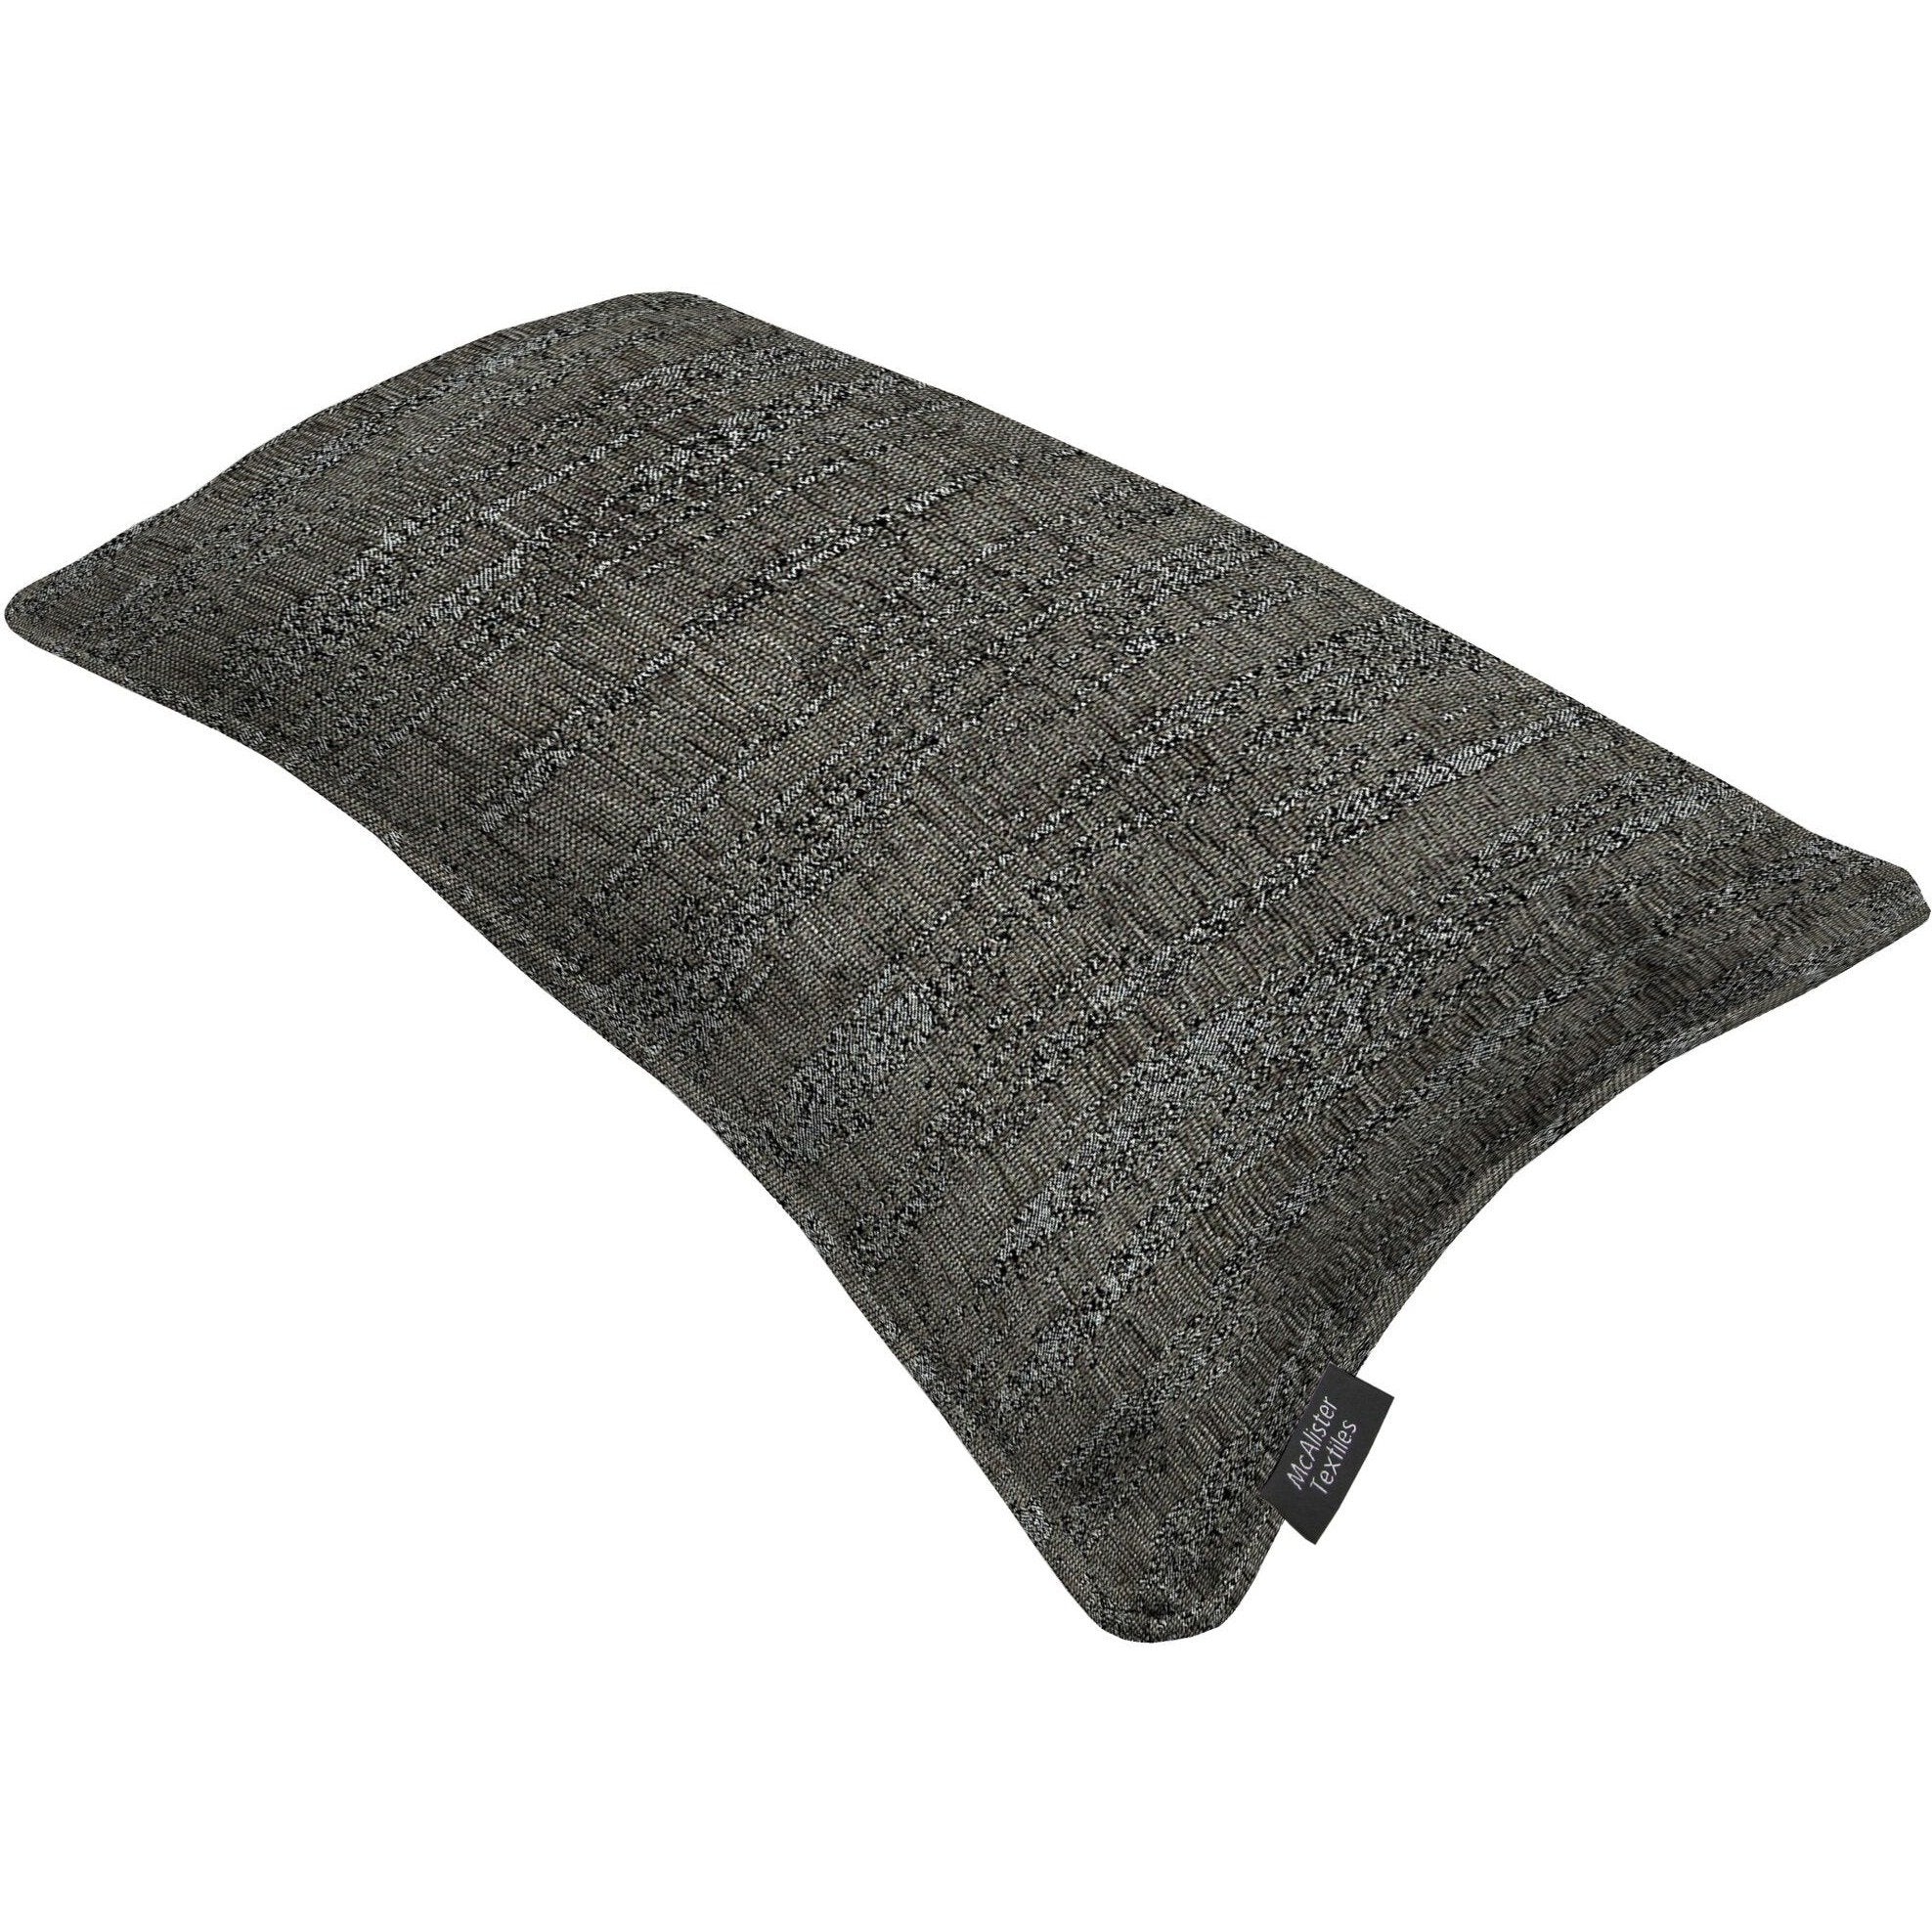 McAlister Textiles Textured Chenille Charcoal Grey Cushion Cushions and Covers 